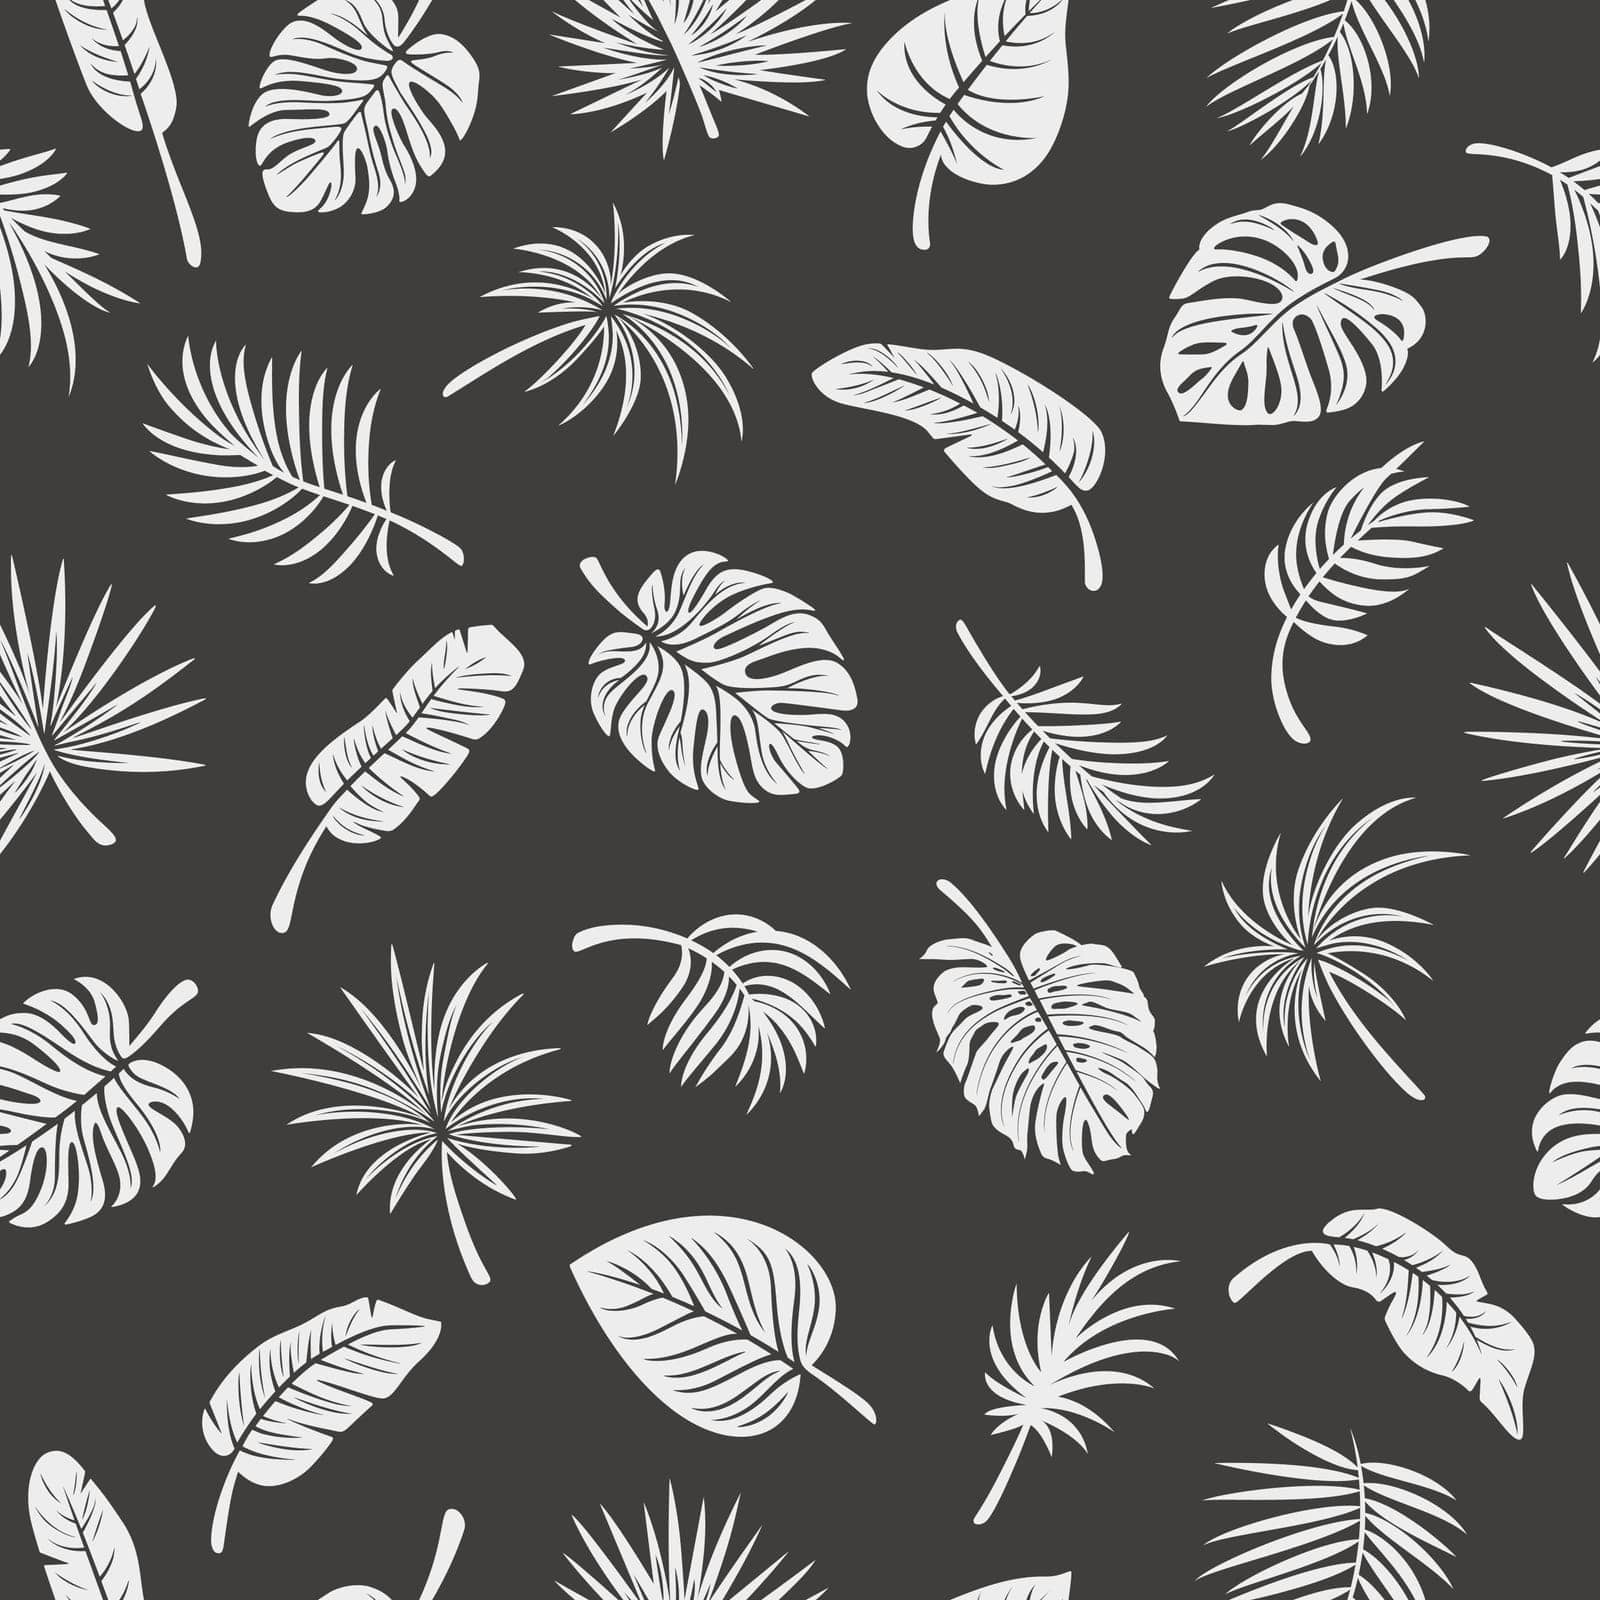 Vector Seamless Pattern with Tropical Leaf Silhouettes. Flat Vector Black and White Cutout Style Monstera, Ficus, Banana Leaf, Dracaena, Sabal Palm Leaves, Isolated by Gomolach